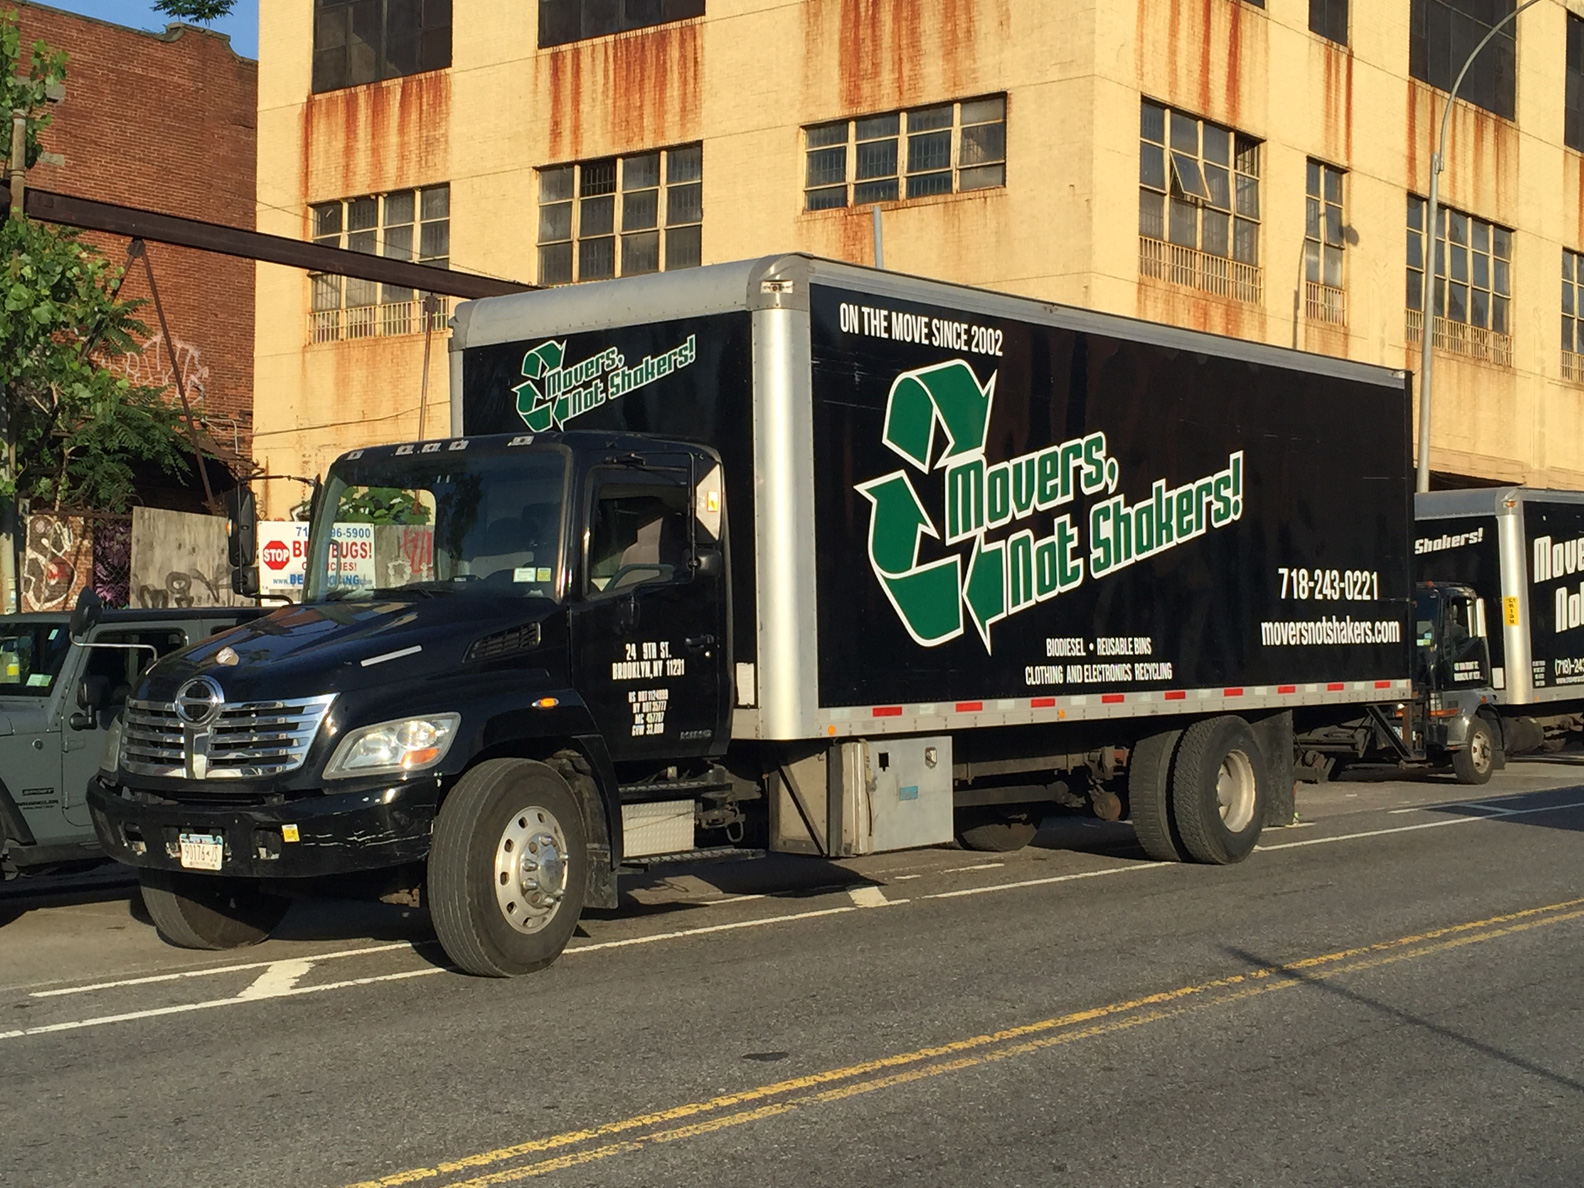 Windsor Terrace Movers parked in the street